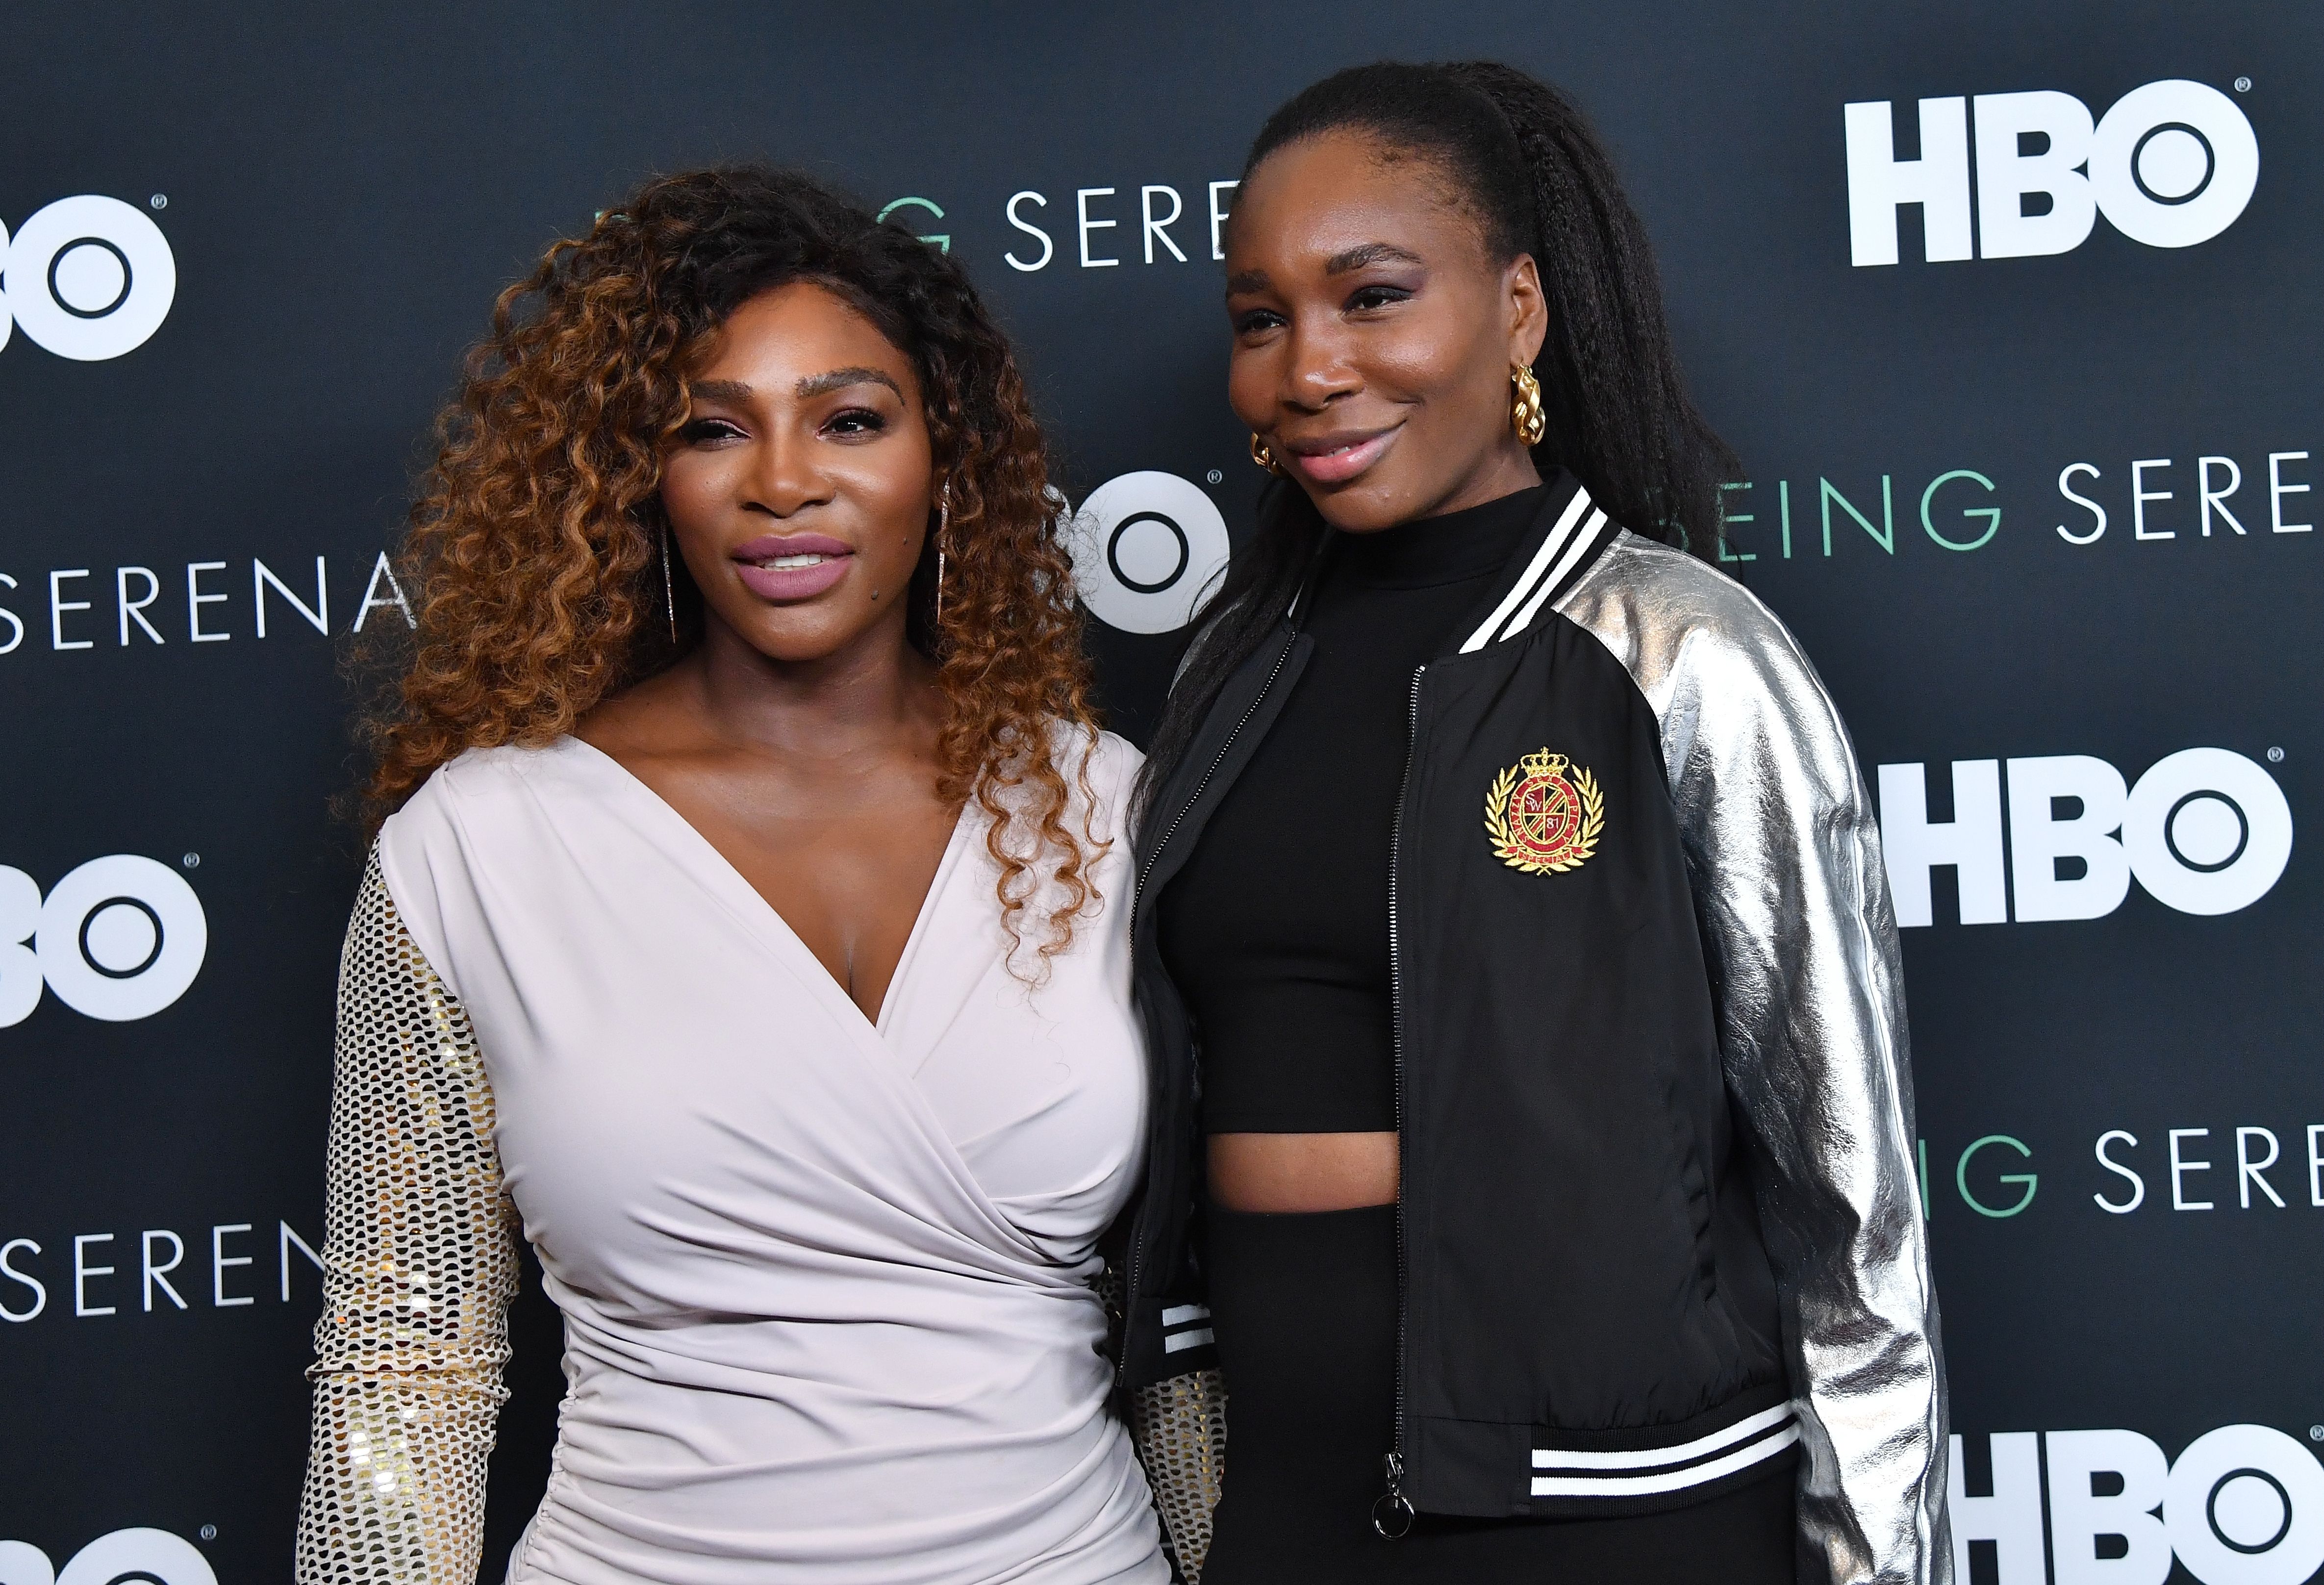 Serena Williams and Venus Williams smile and pose together on red carpet at HBO premiere of 'Being Serena'